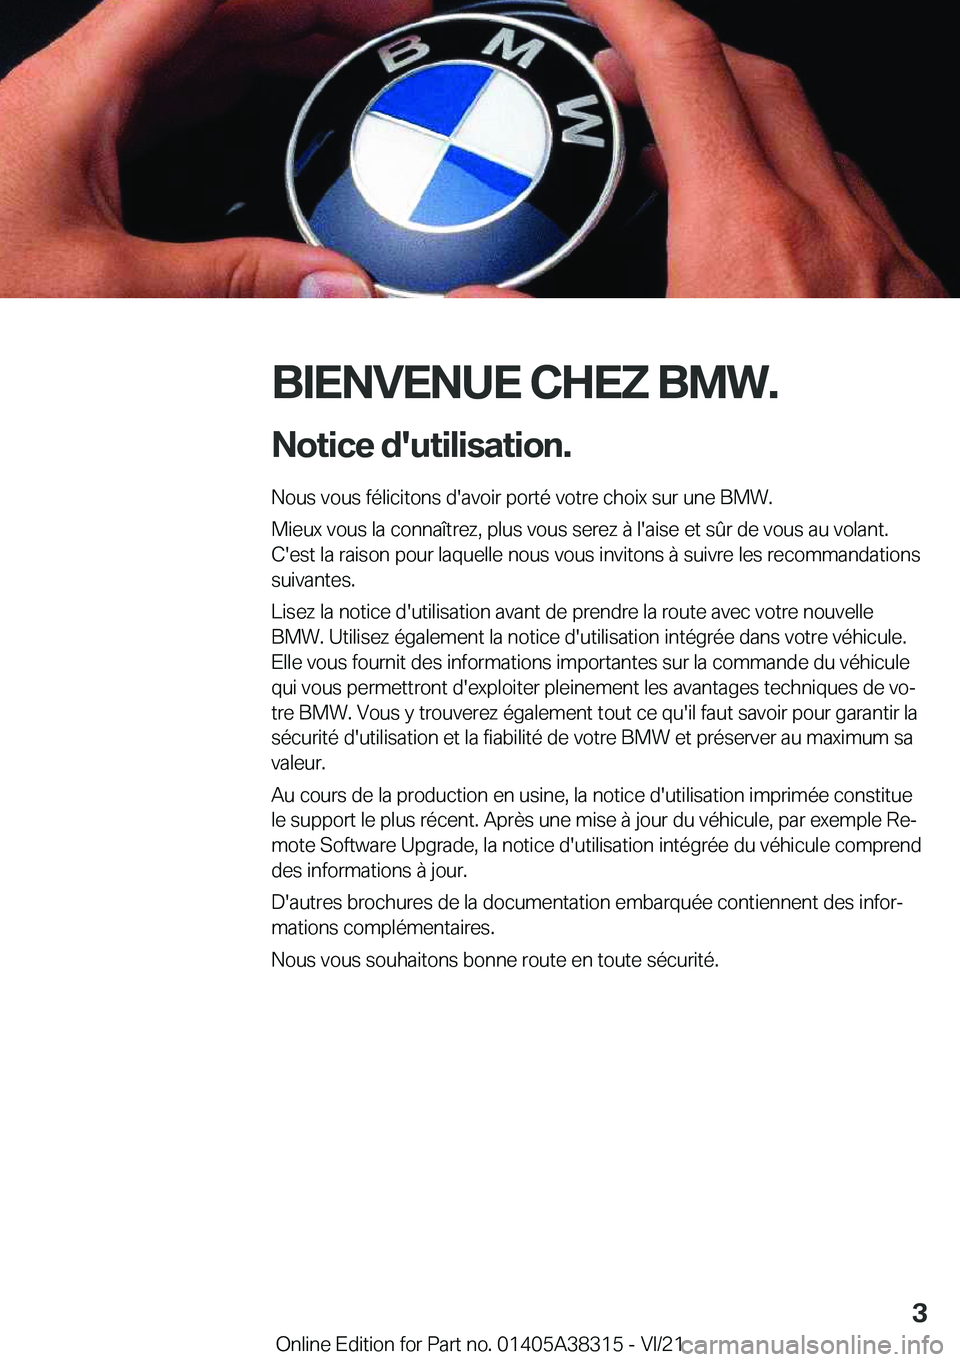 BMW 2 SERIES GRAN COUPE 2022  Notices Demploi (in French) �B�I�E�N�V�E�N�U�E��C�H�E�Z��B�M�W�.�N�o�t�i�c�e��d�'�u�t�i�l�i�s�a�t�i�o�n�.
�N�o�u�s��v�o�u�s��f�é�l�i�c�i�t�o�n�s��d�'�a�v�o�i�r��p�o�r�t�é��v�o�t�r�e��c�h�o�i�x��s�u�r��u�n�e�